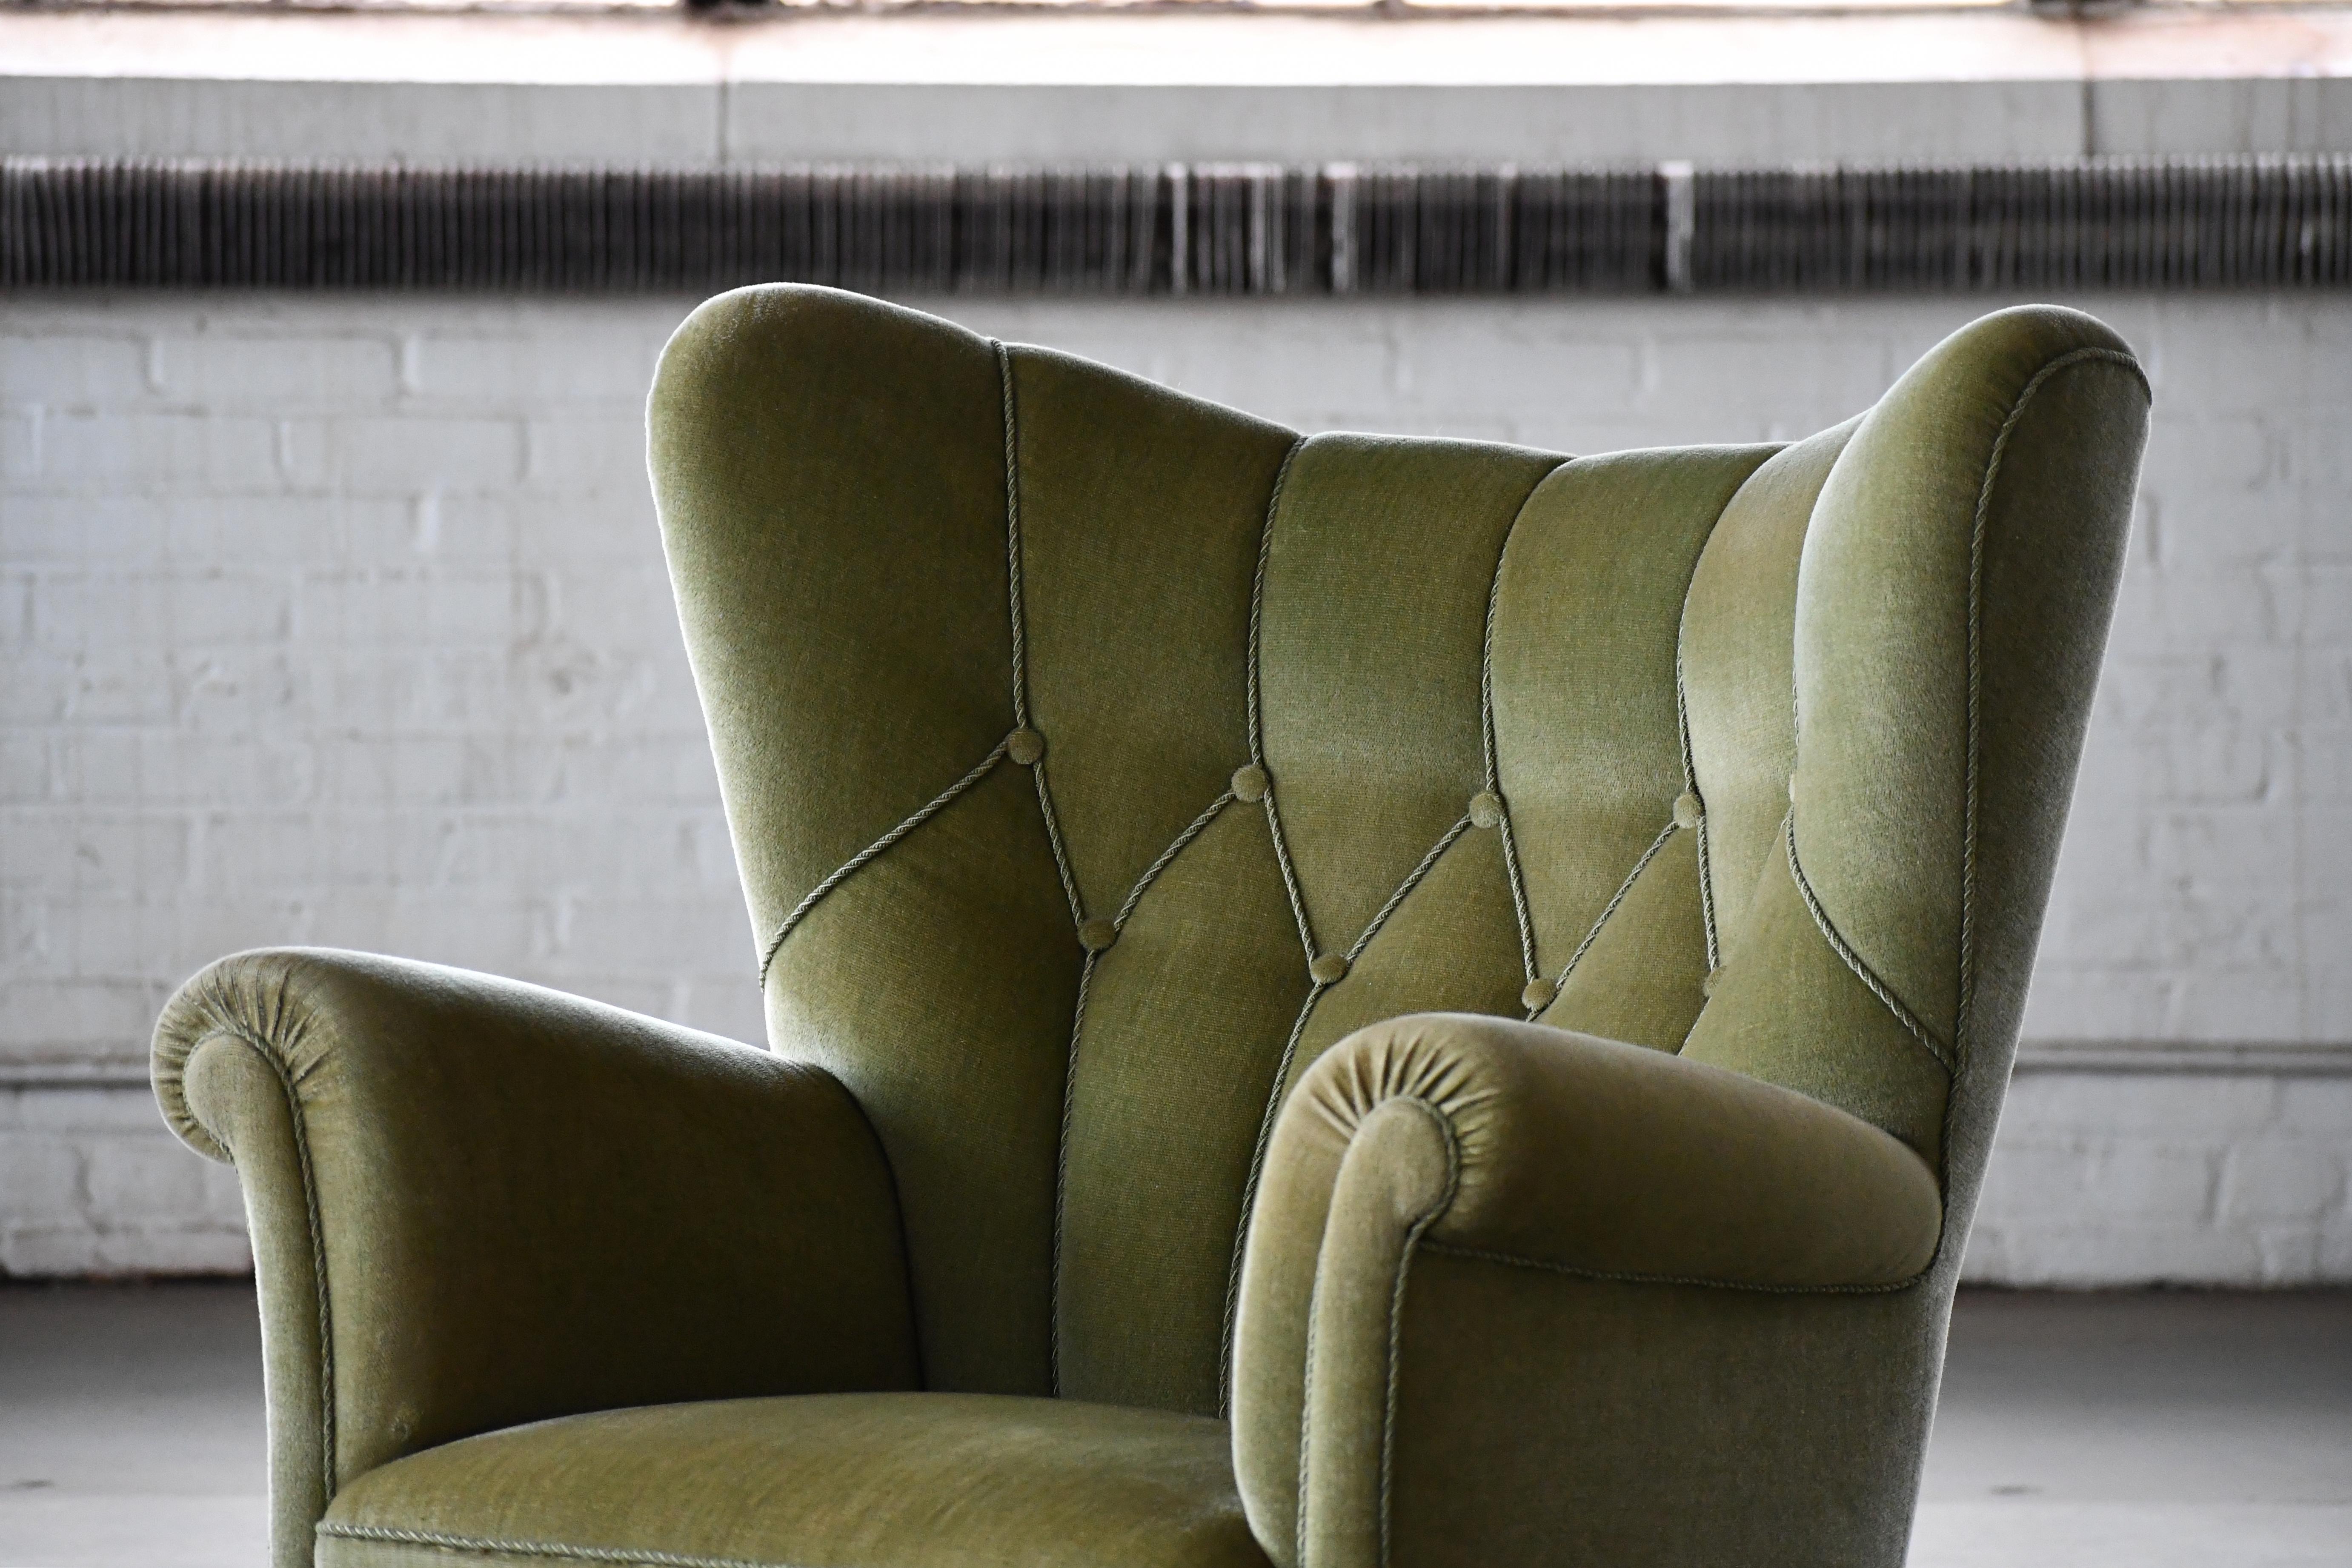 Mid-20th Century Danish Mid-Century Lounge or Club Chair in Green Mohair, 1940's For Sale